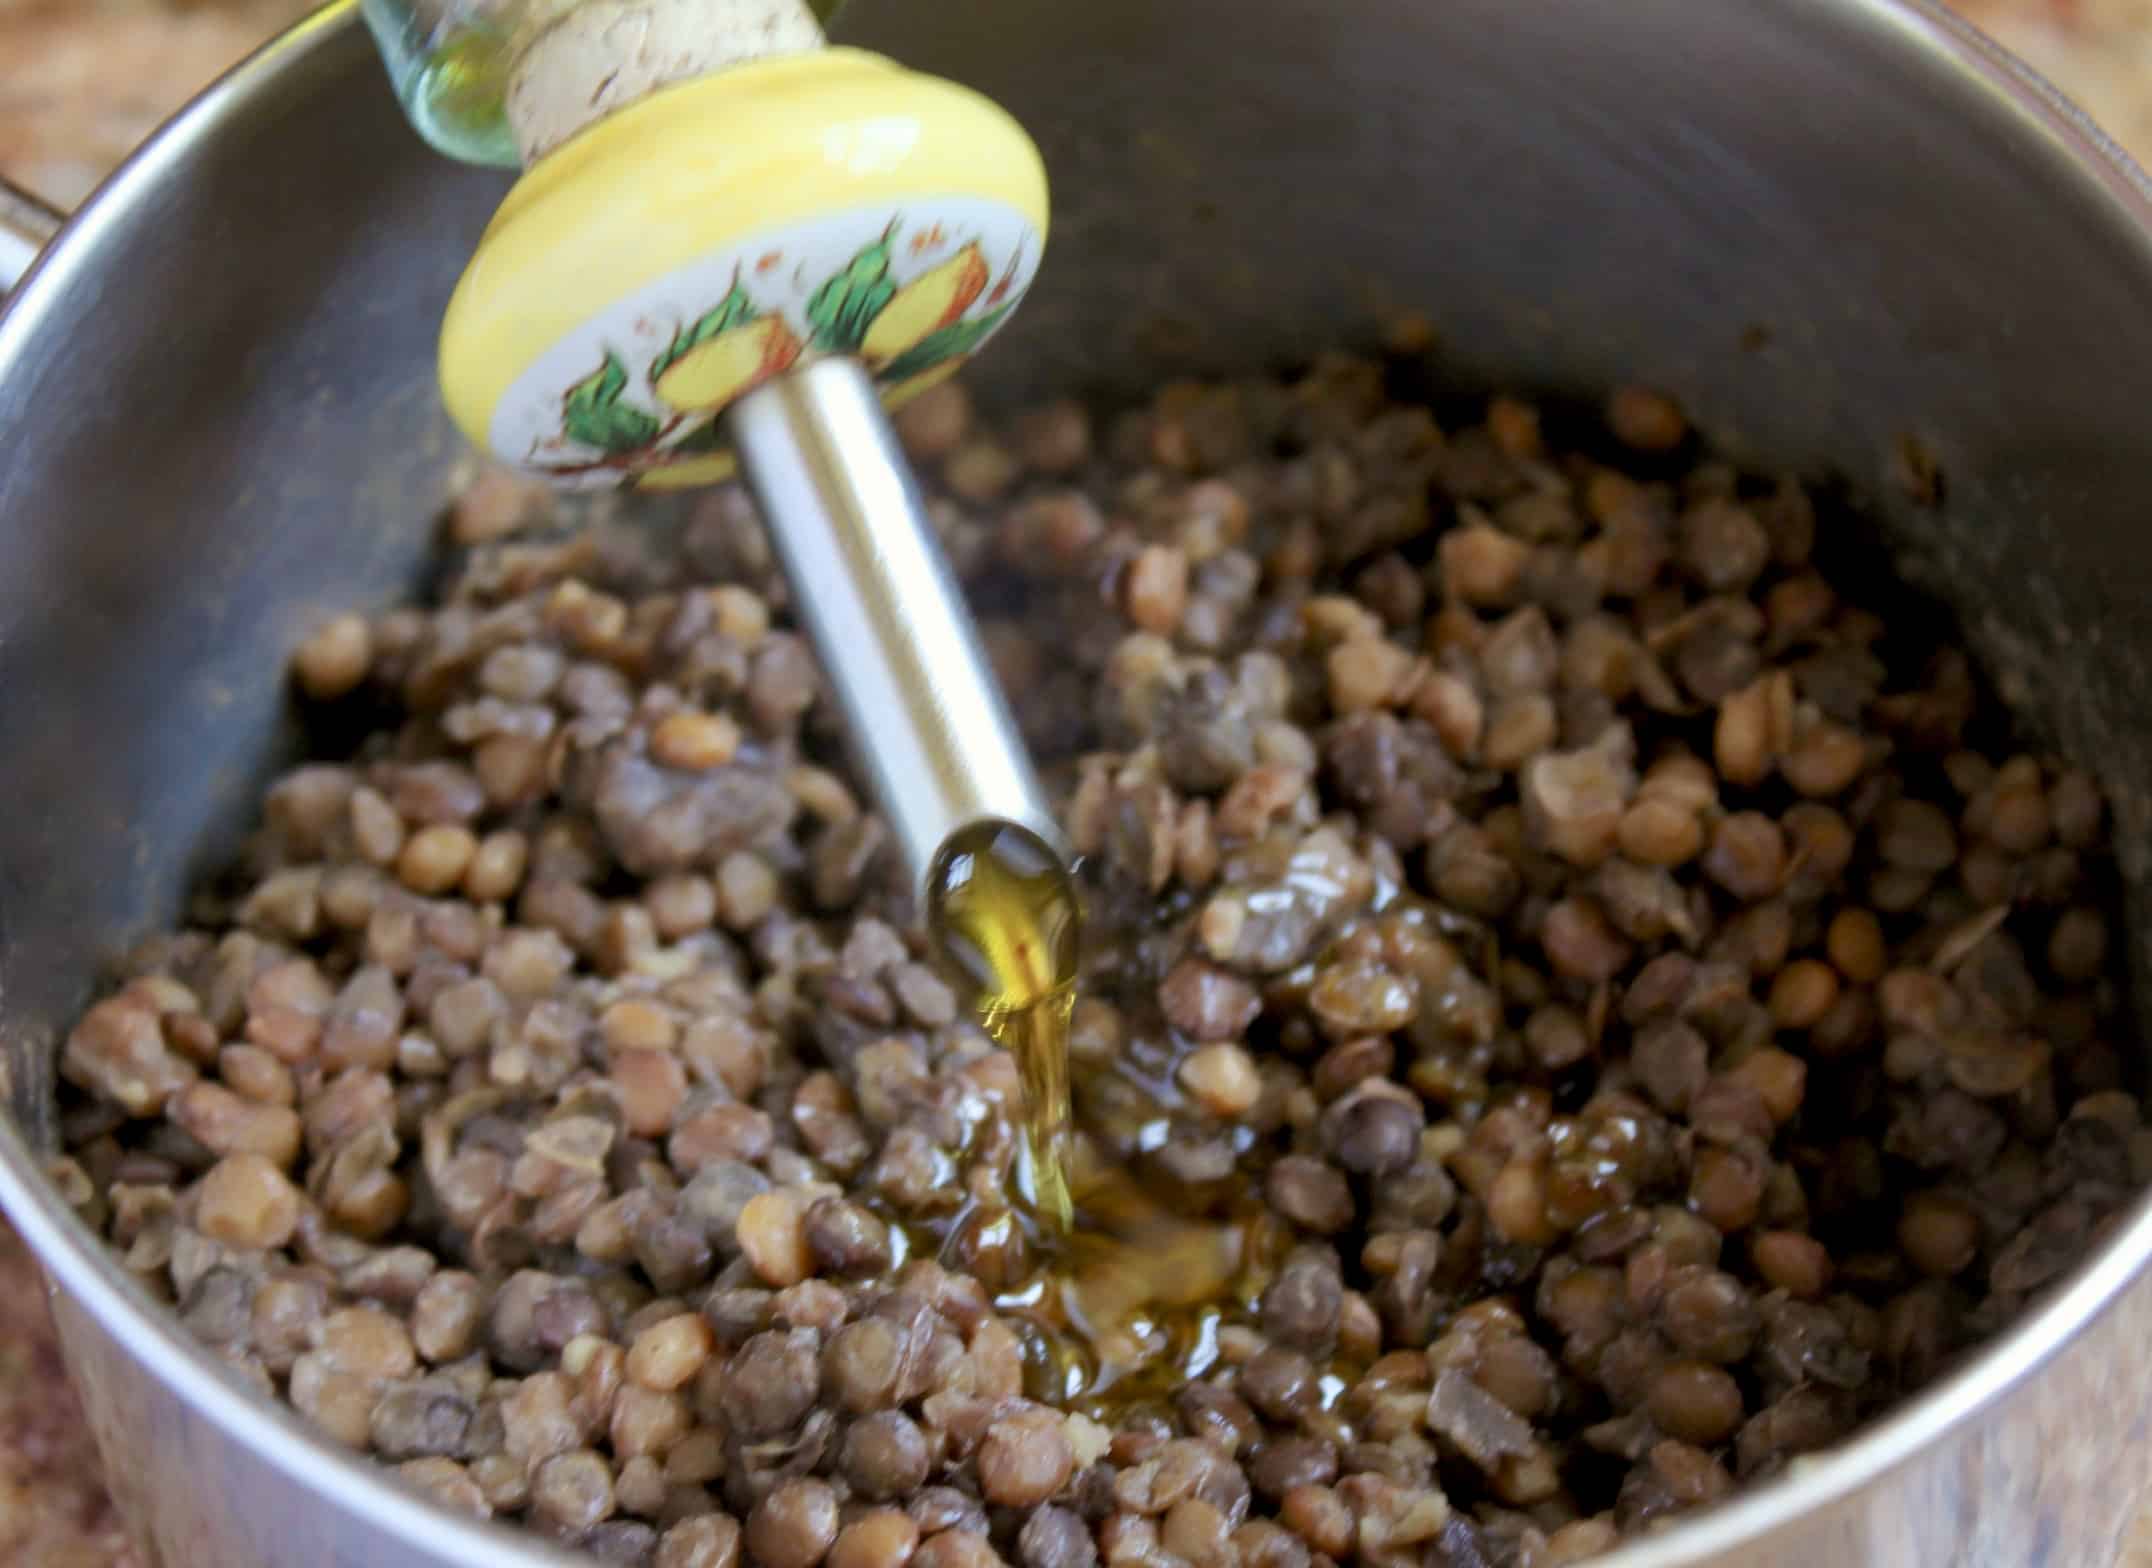 adding olive oil to the cooked legumes